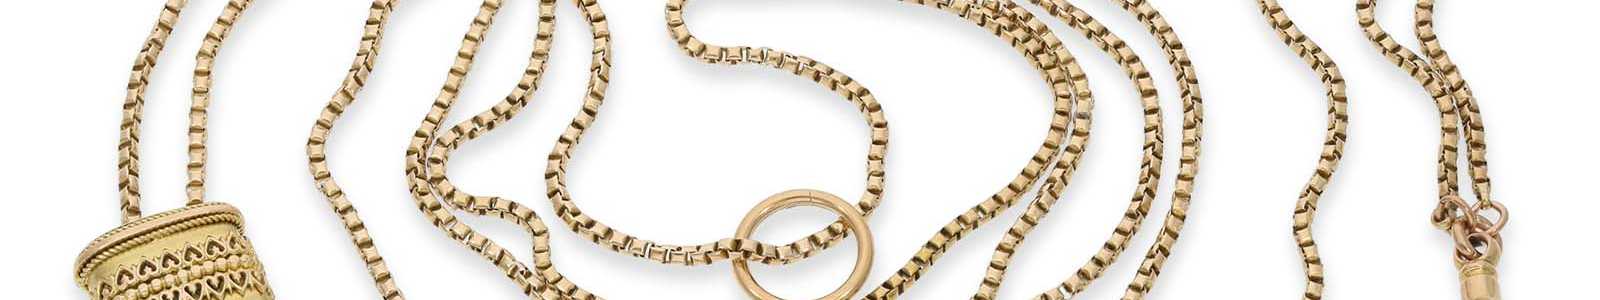 207 Auction: Fine Jewelry - Antique to Modern